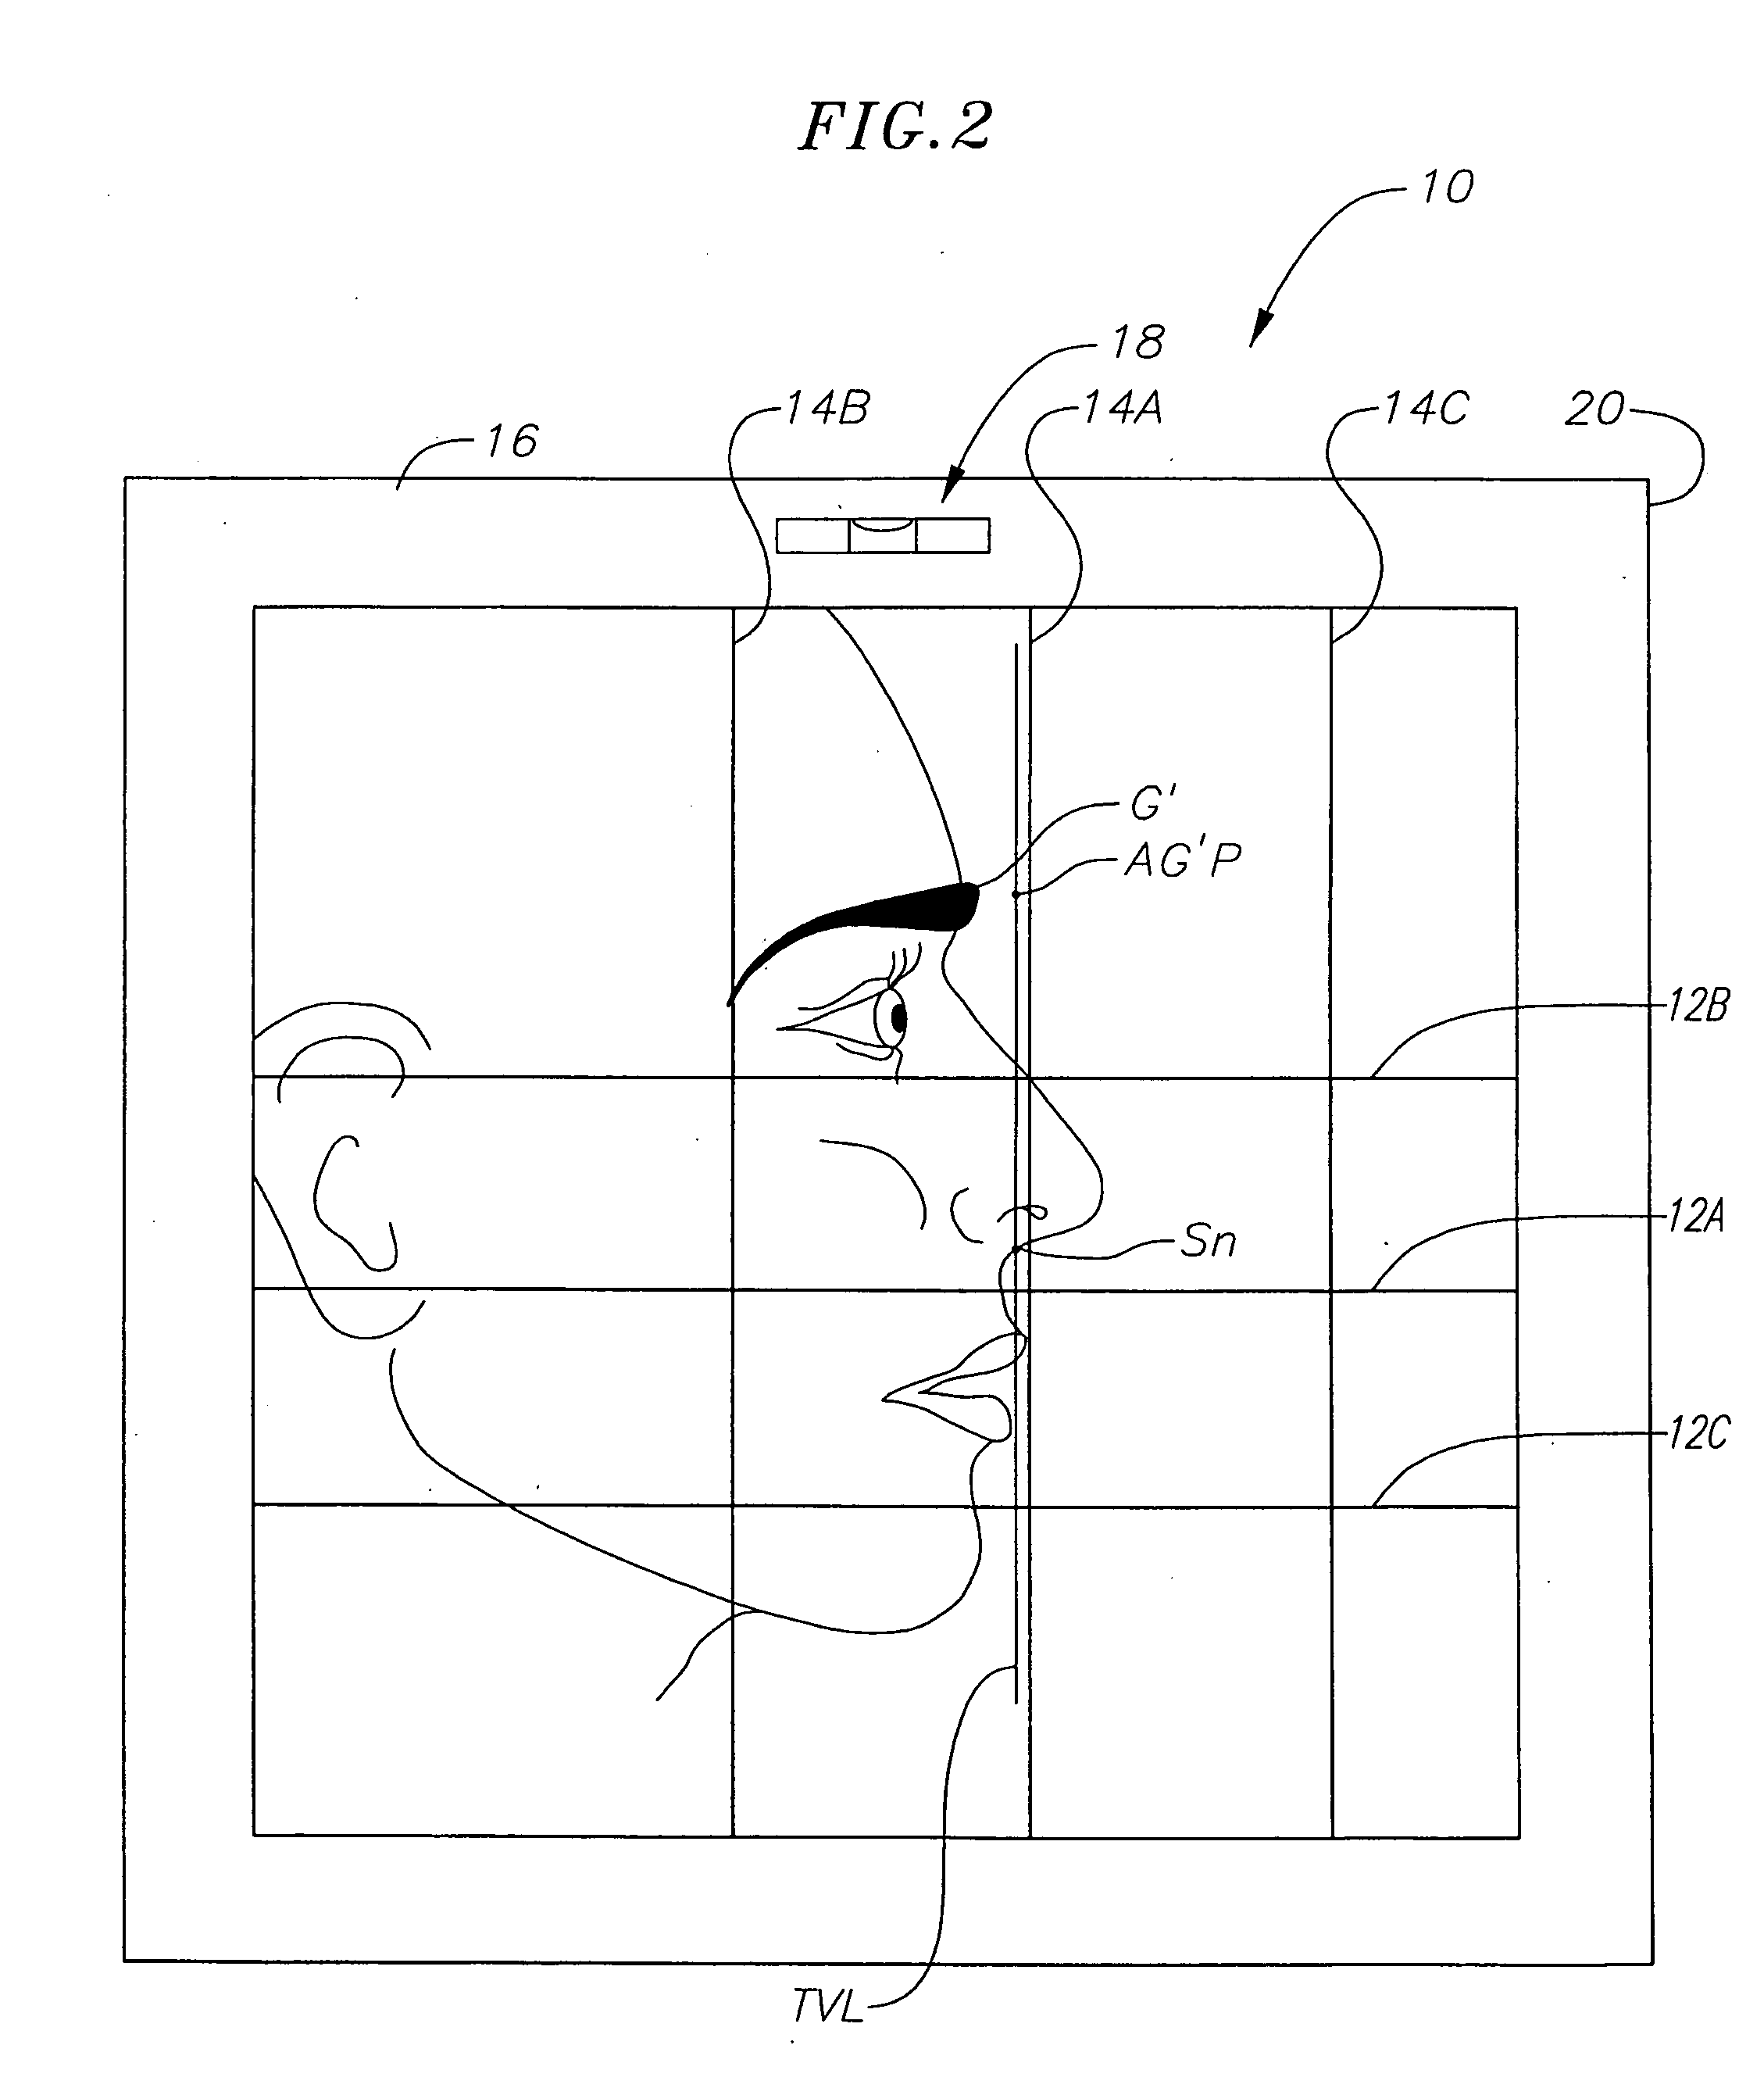 Method for determining the correct natural head position location of references planes relative to a three-dimensional computerized image of a patient's head